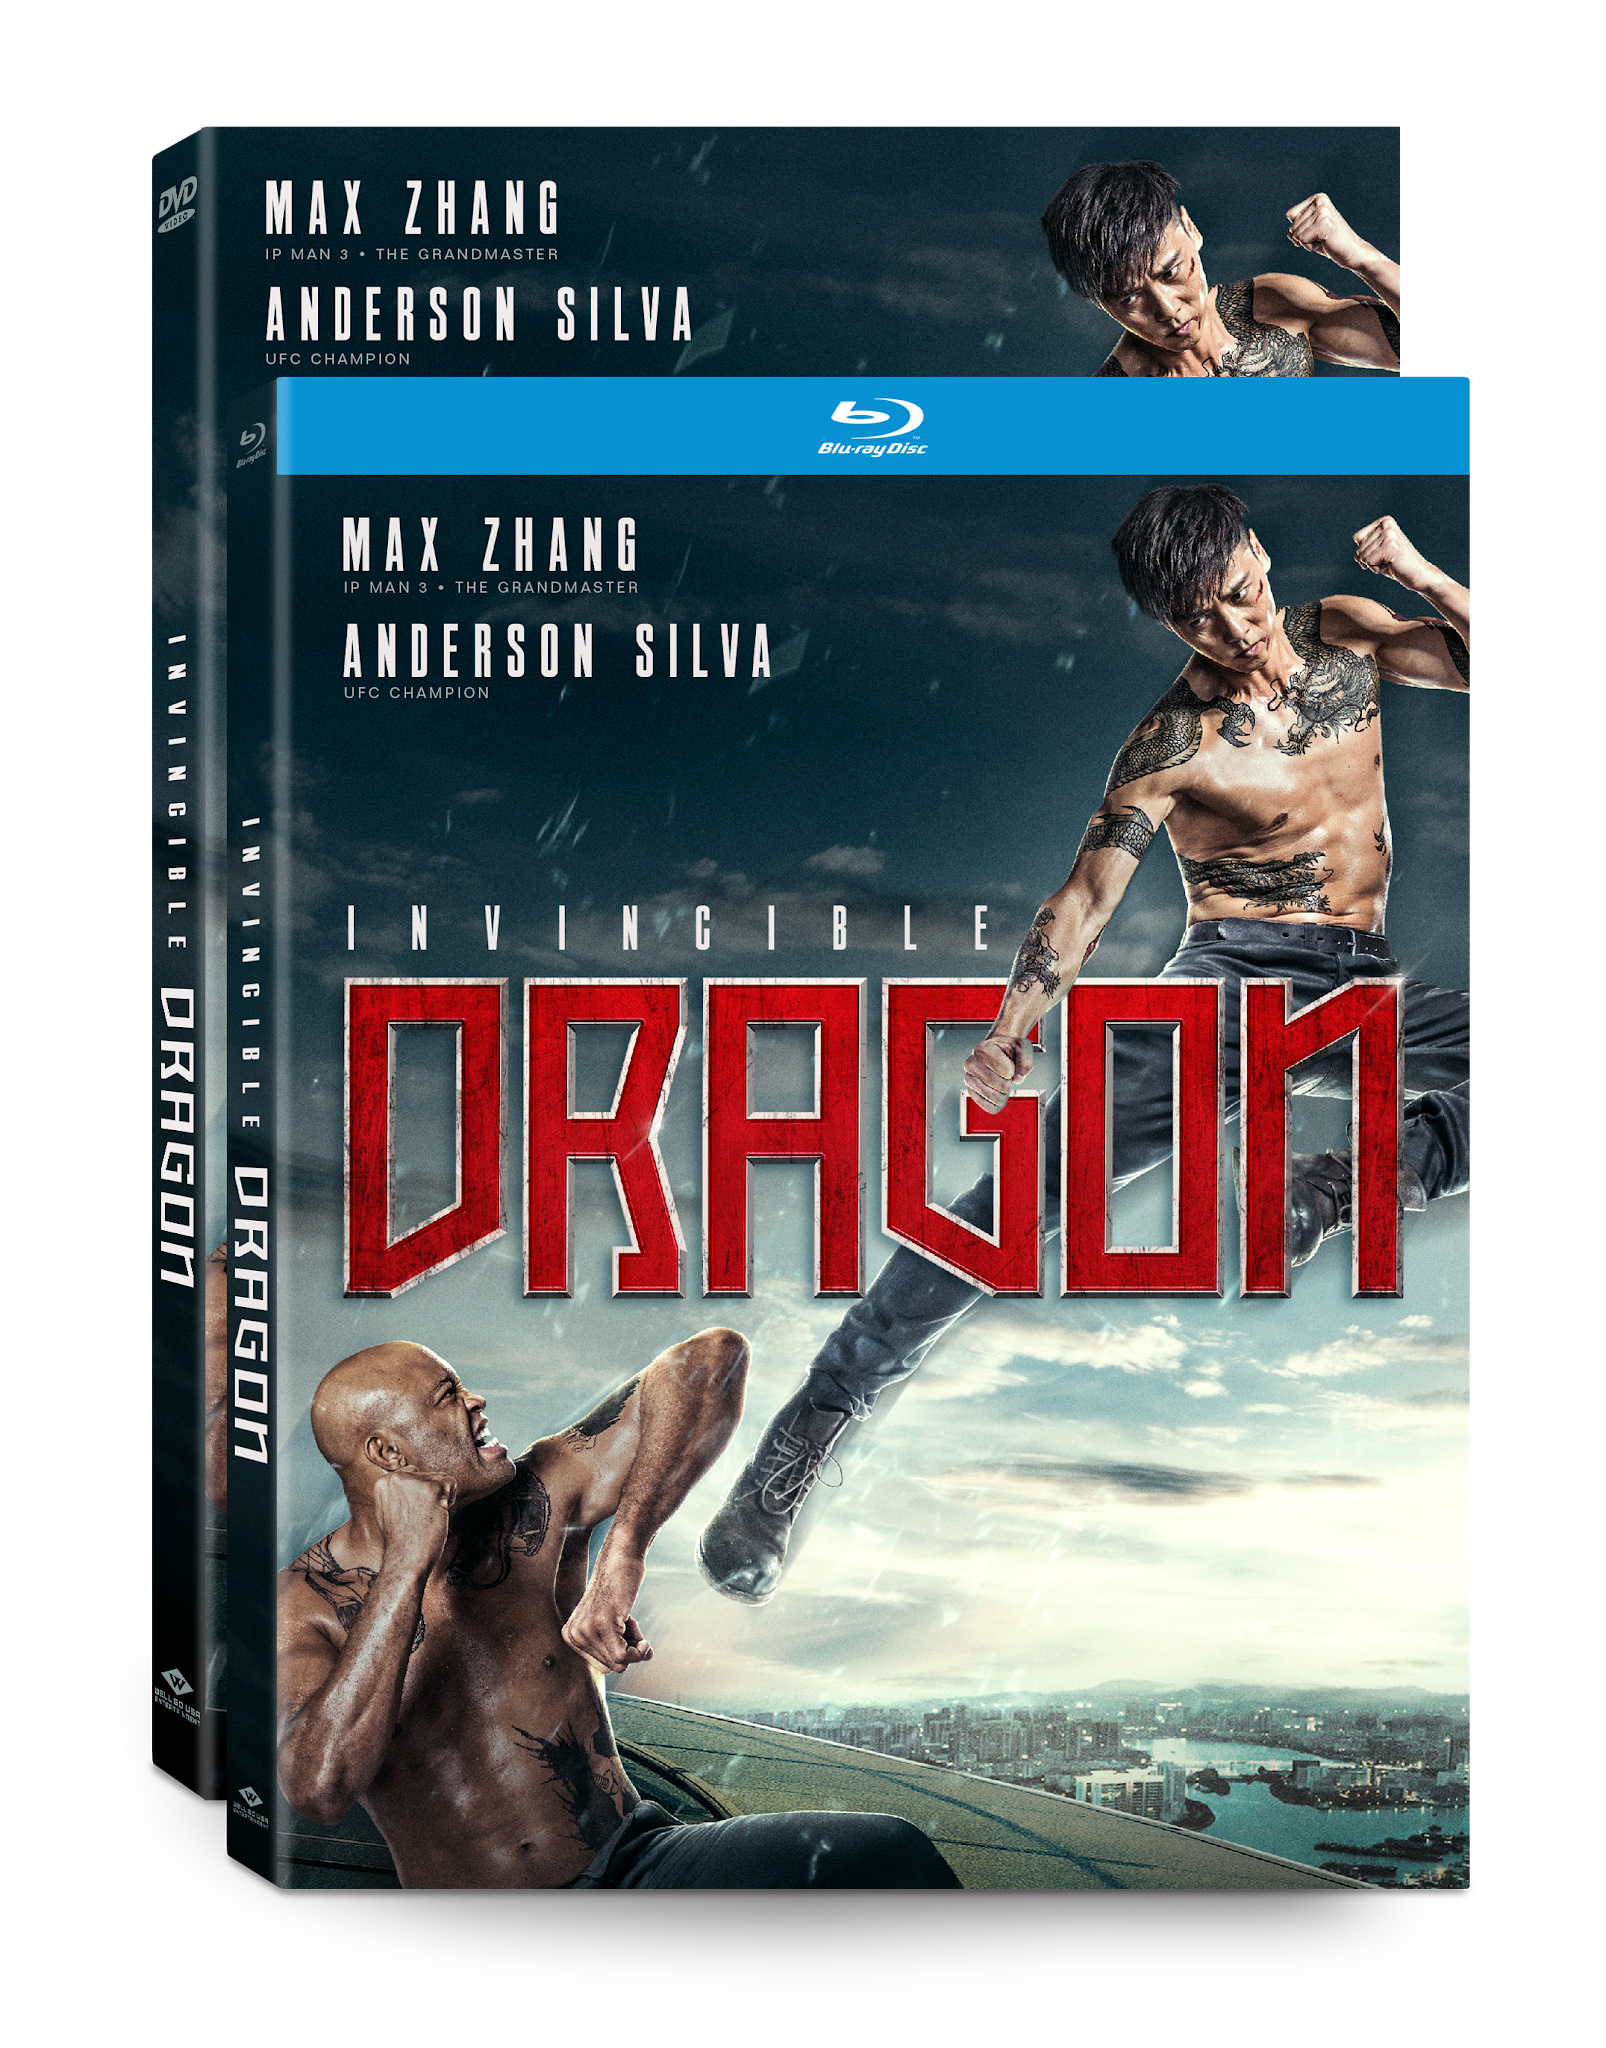 Invincible Dragon  VERN'S REVIEWS on the FILMS of CINEMA